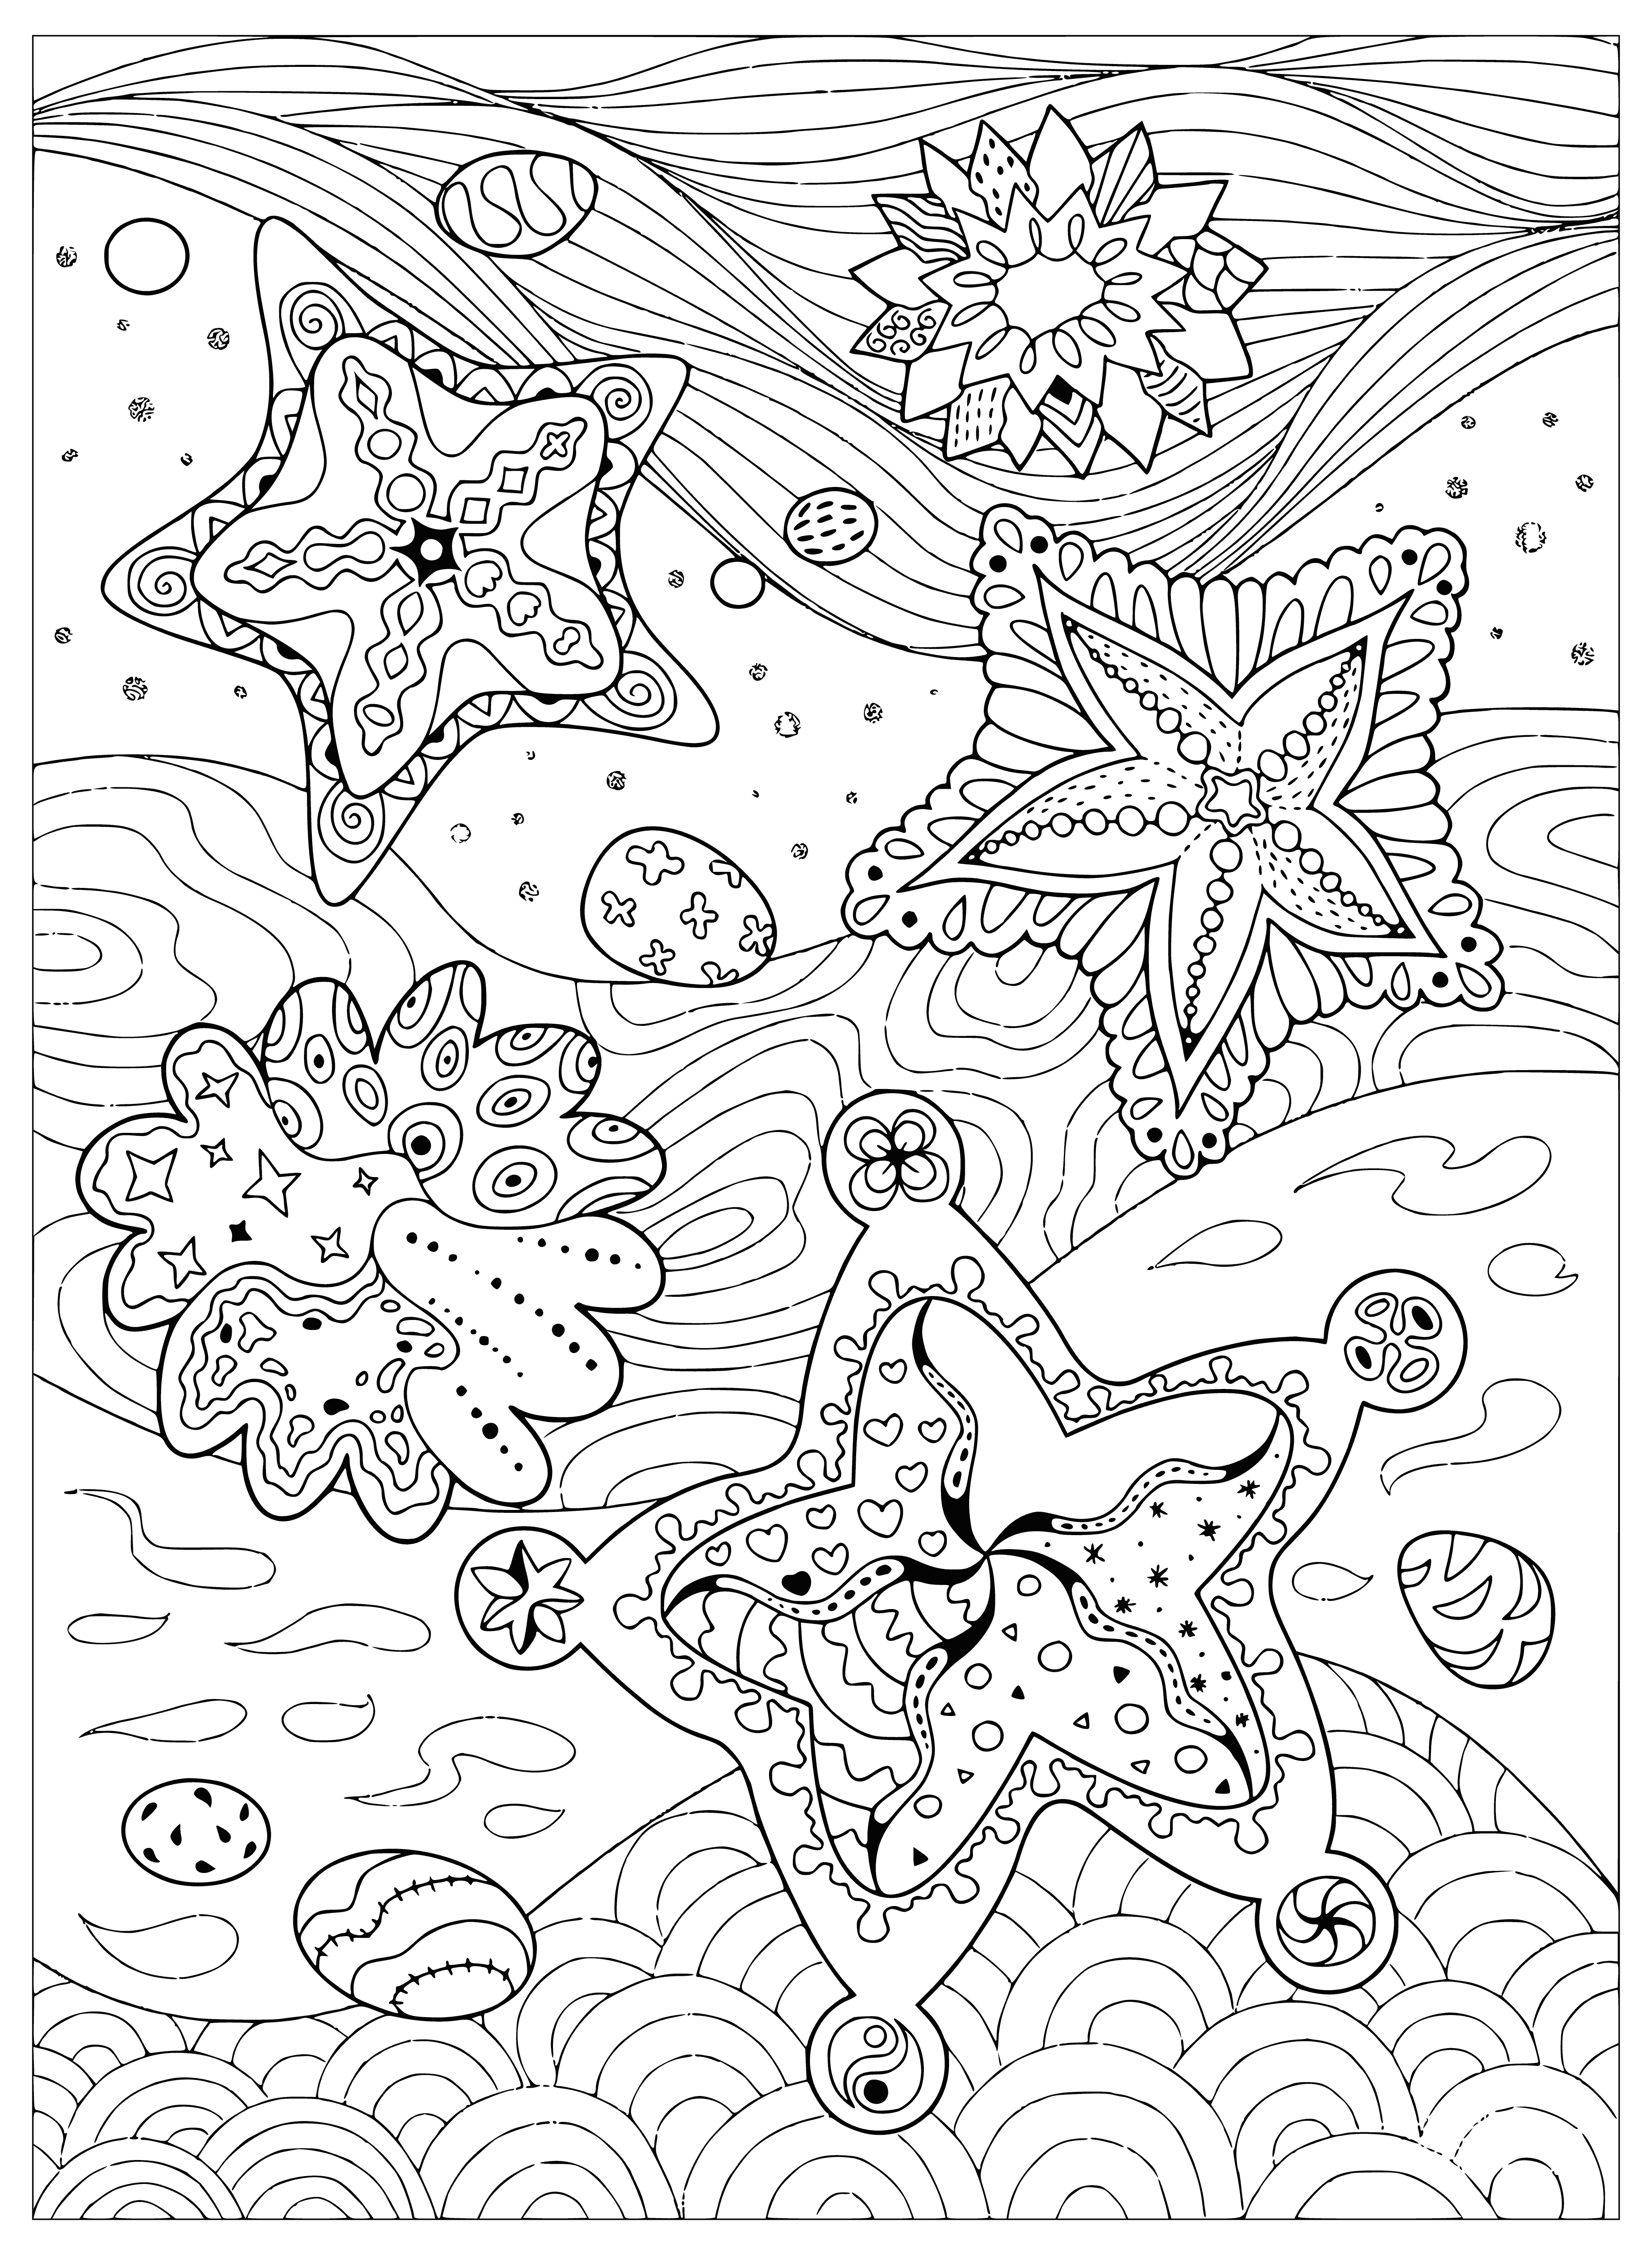 coloring page: 5 white starfish of different sizes surrounded by brightly-colored fish, coral & plants on a black background.